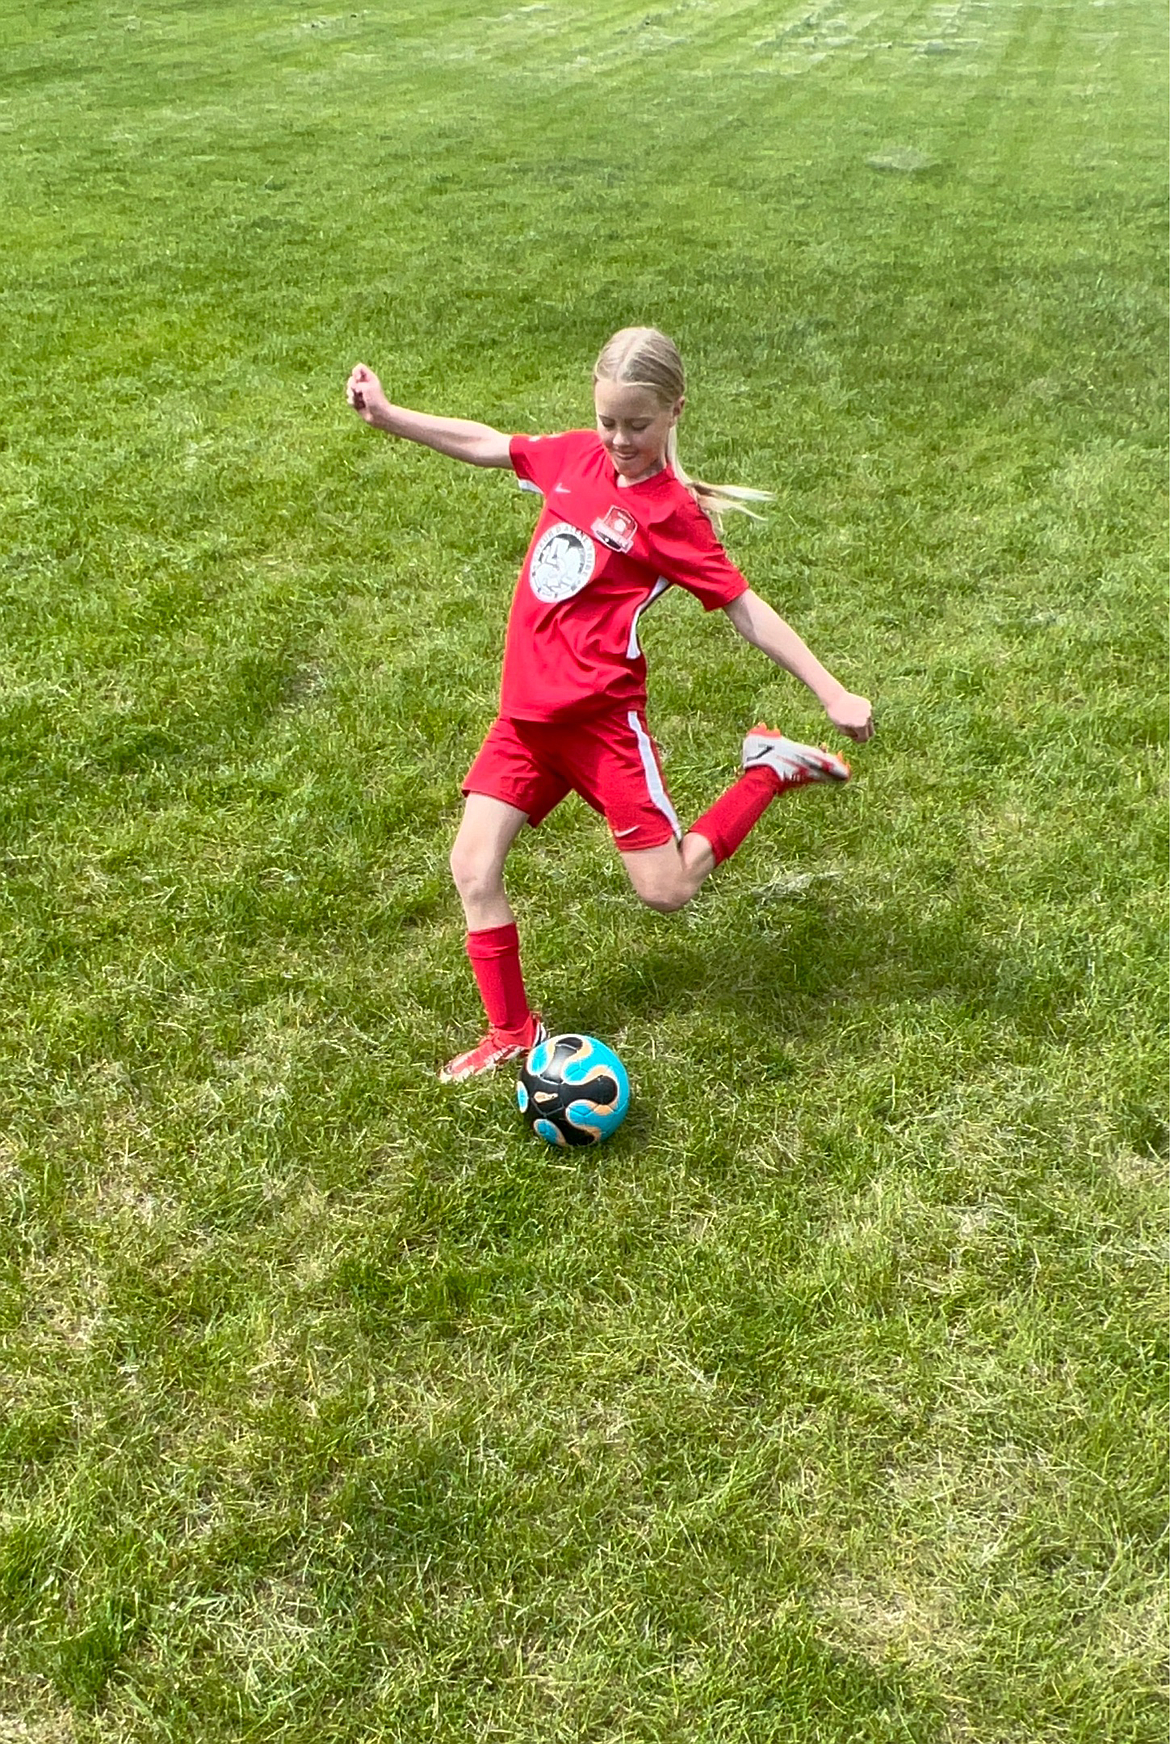 Photo by BRITNEY NUSSER
On Saturday morning, the Thorns 2011 Girls Yellow soccer team tied with FC Spokane 2012G Premier team 2-2. Brightyn Gatten (pictured) and Hailey Viaud each scored one goal. Later that afternoon the Thorns played Spokane Sounders 2011G North and lost 3-1. The Thorns goal came from Brightyn Gatten with an assist from Kylie Lorona.